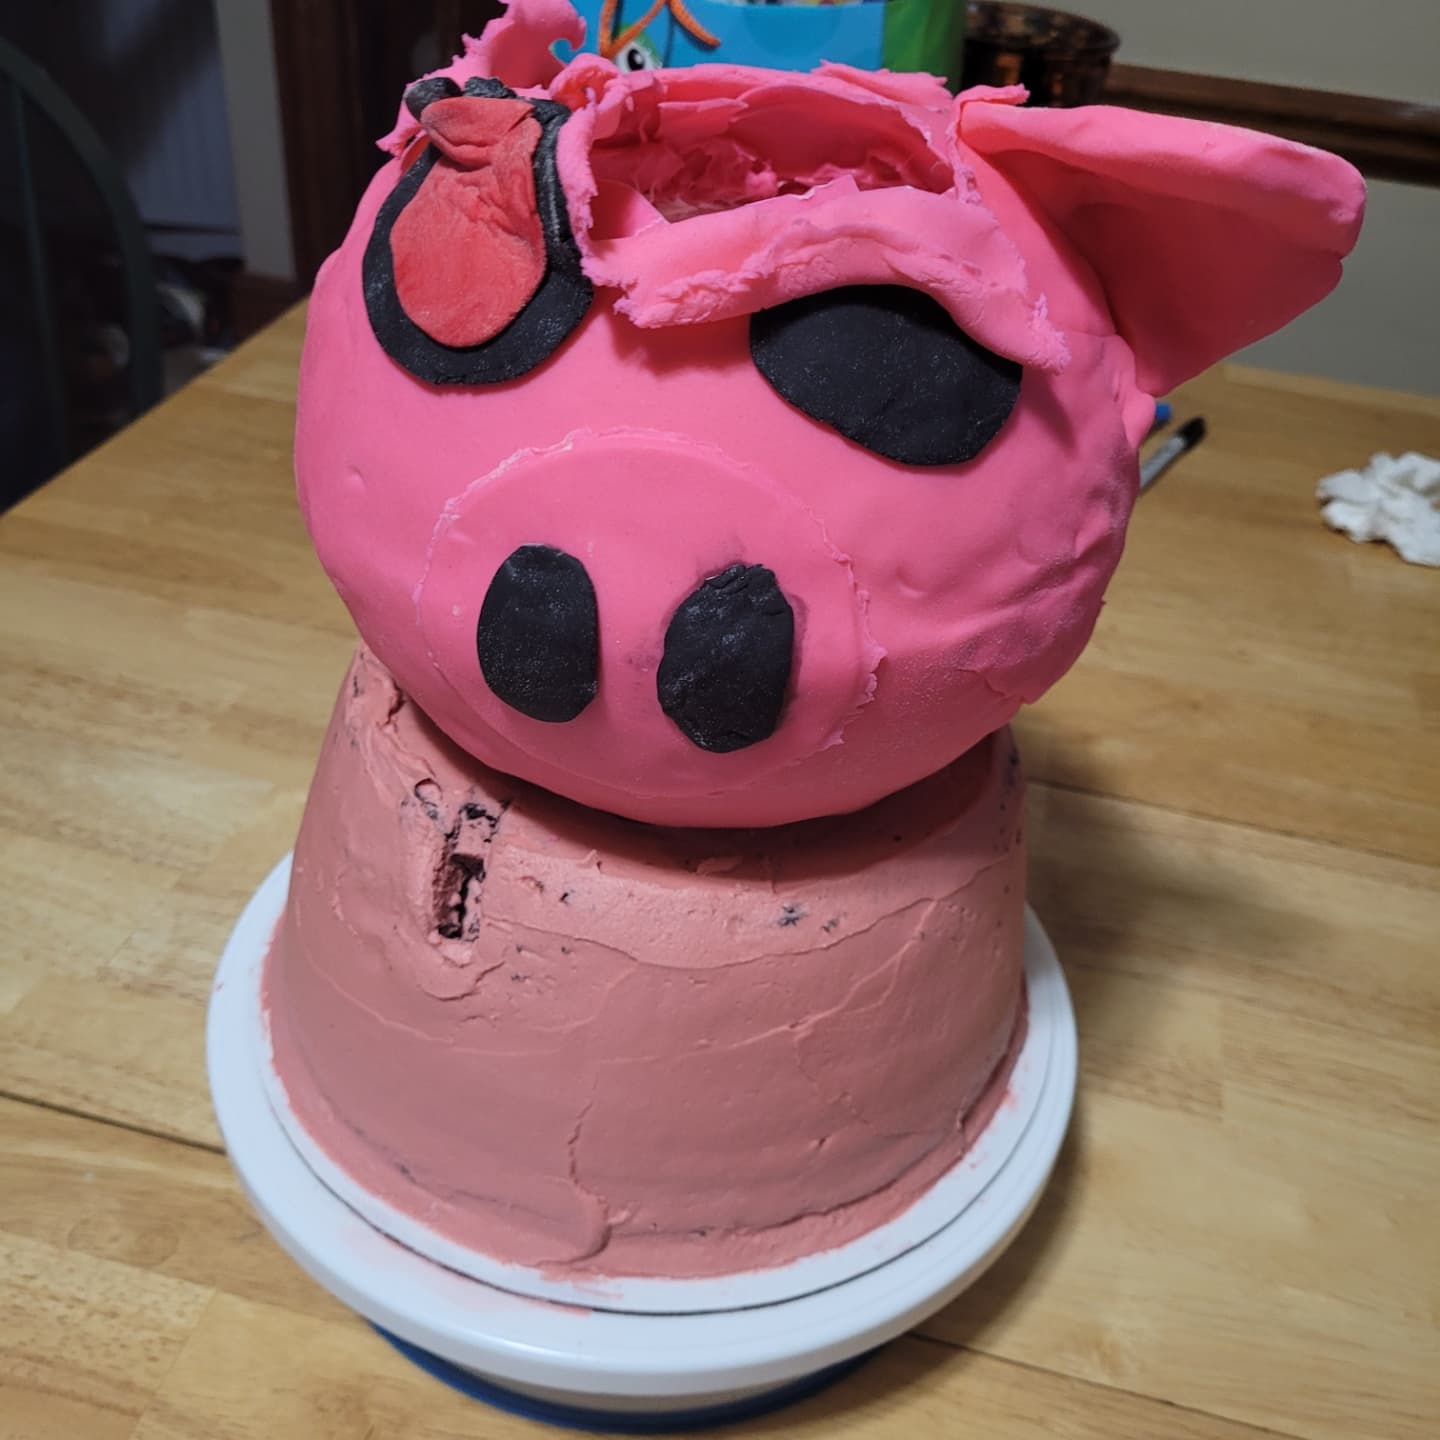 Piggy Wiki cake pops #roblox - L&L Cakes and Chocolates